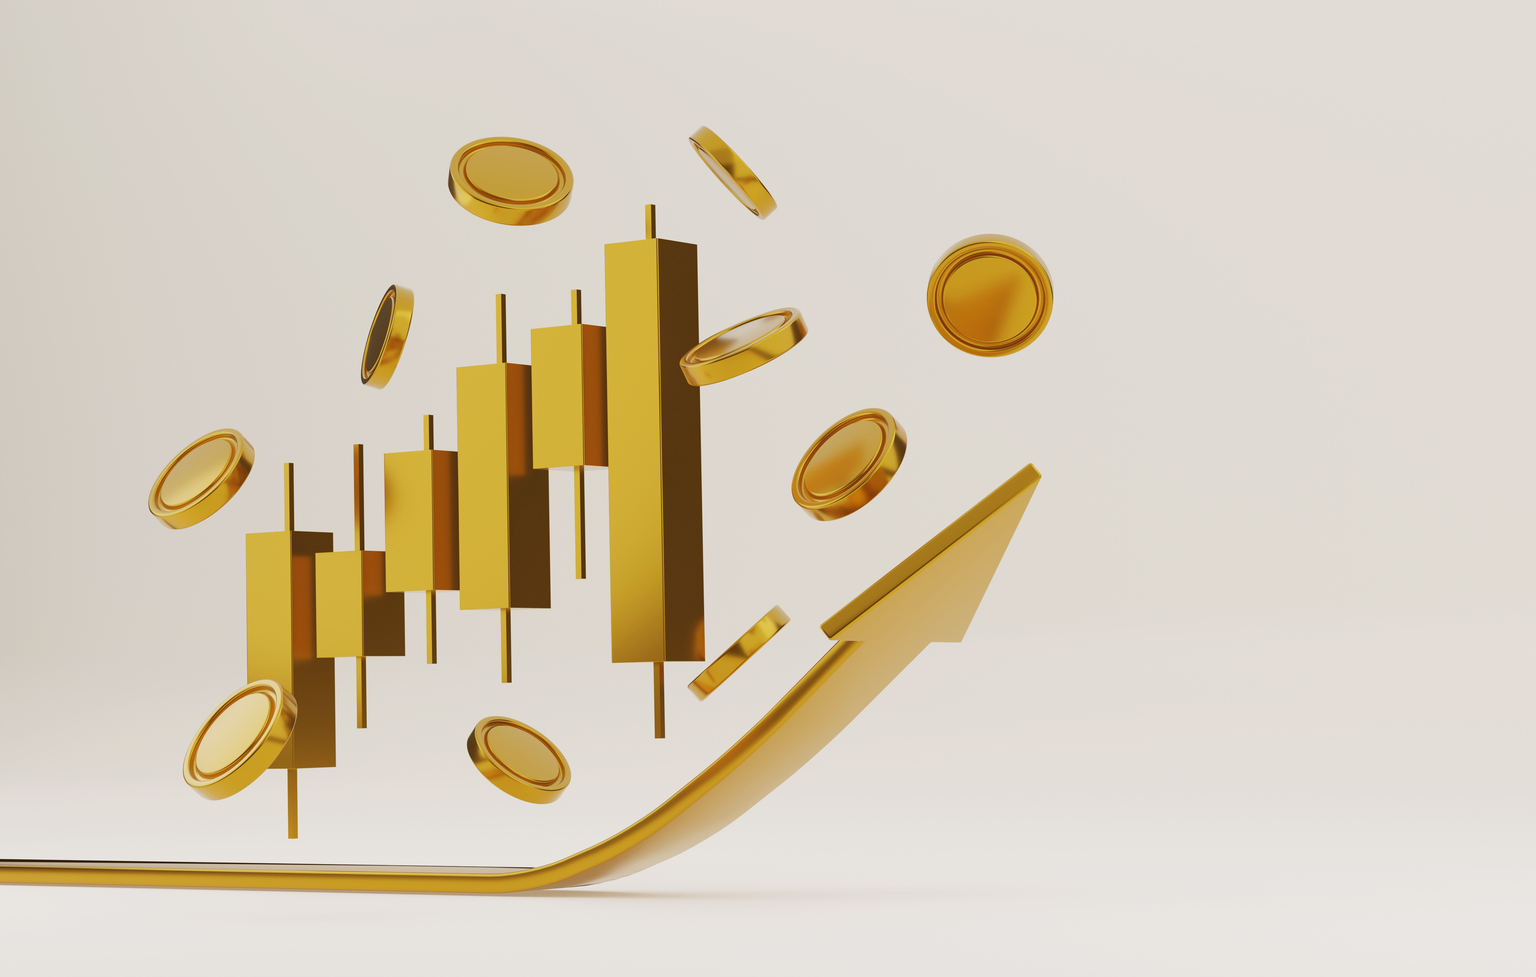 Gold/Silver: The Understated Importance of Supply - CME Group